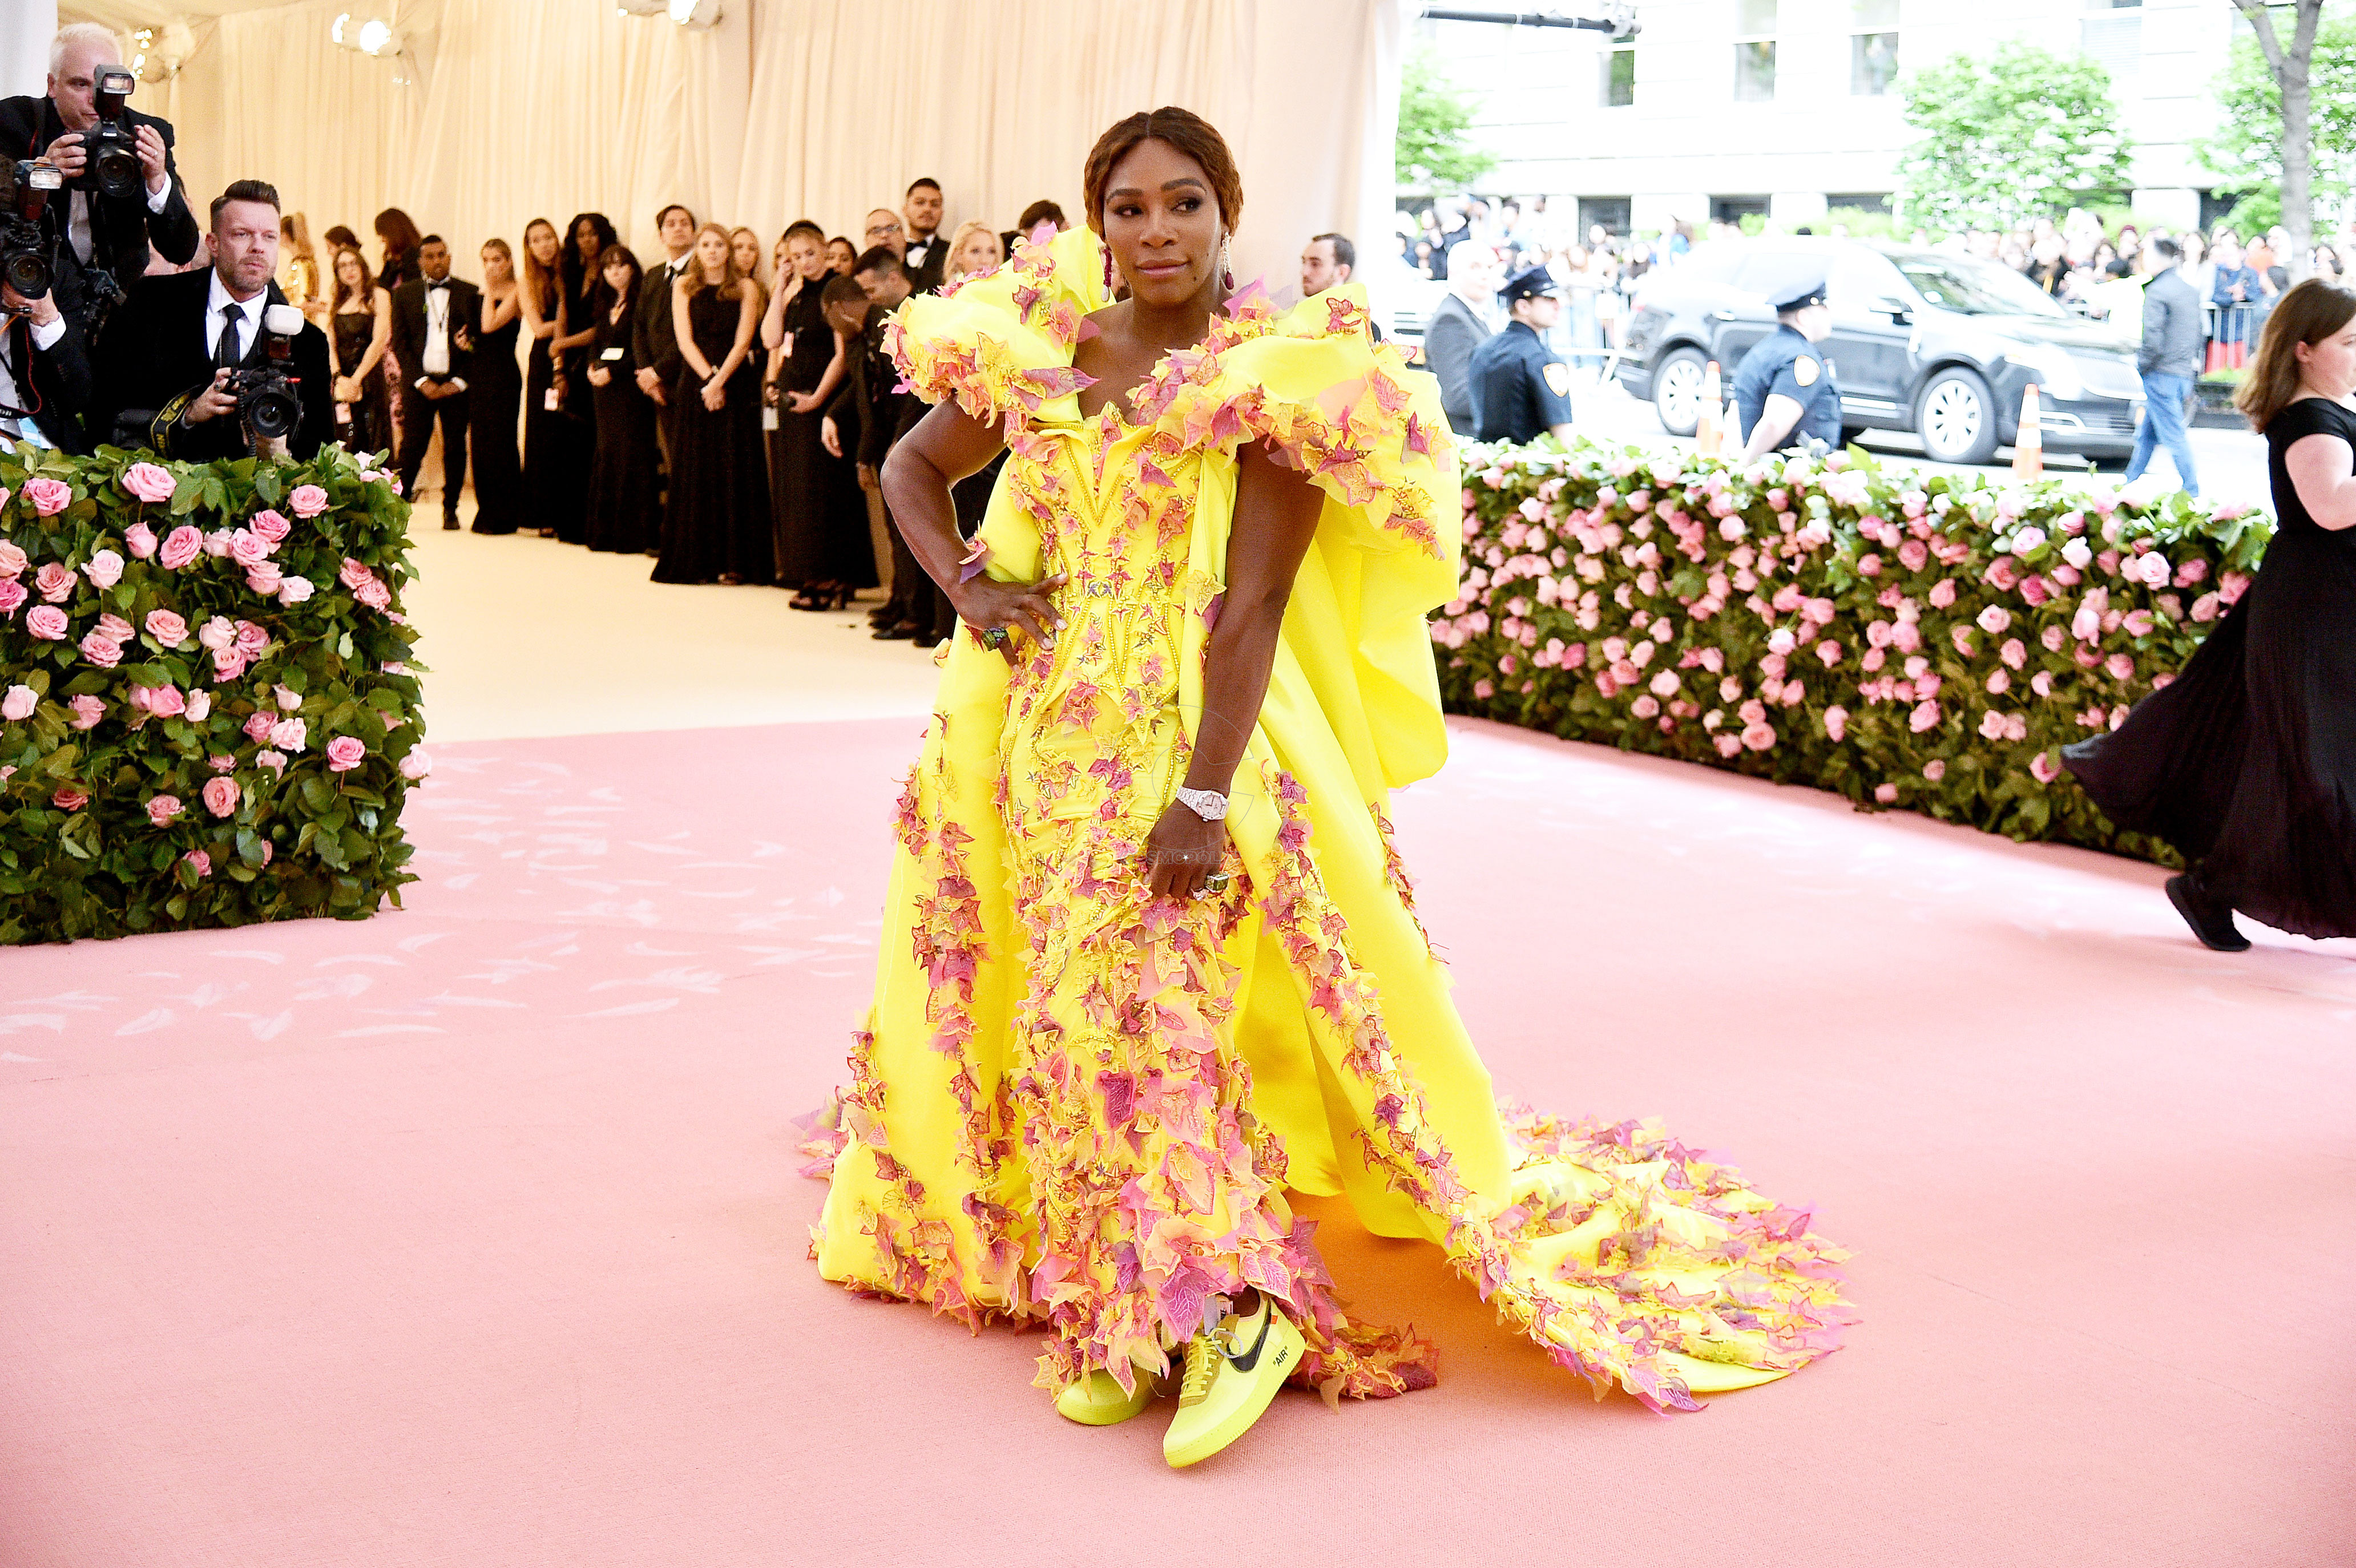 NEW YORK, NEW YORK - MAY 06: Serena Williams attends The 2019 Met Gala Celebrating Camp: Notes on Fashion at Metropolitan Museum of Art on May 06, 2019 in New York City. (Photo by Theo Wargo/WireImage)